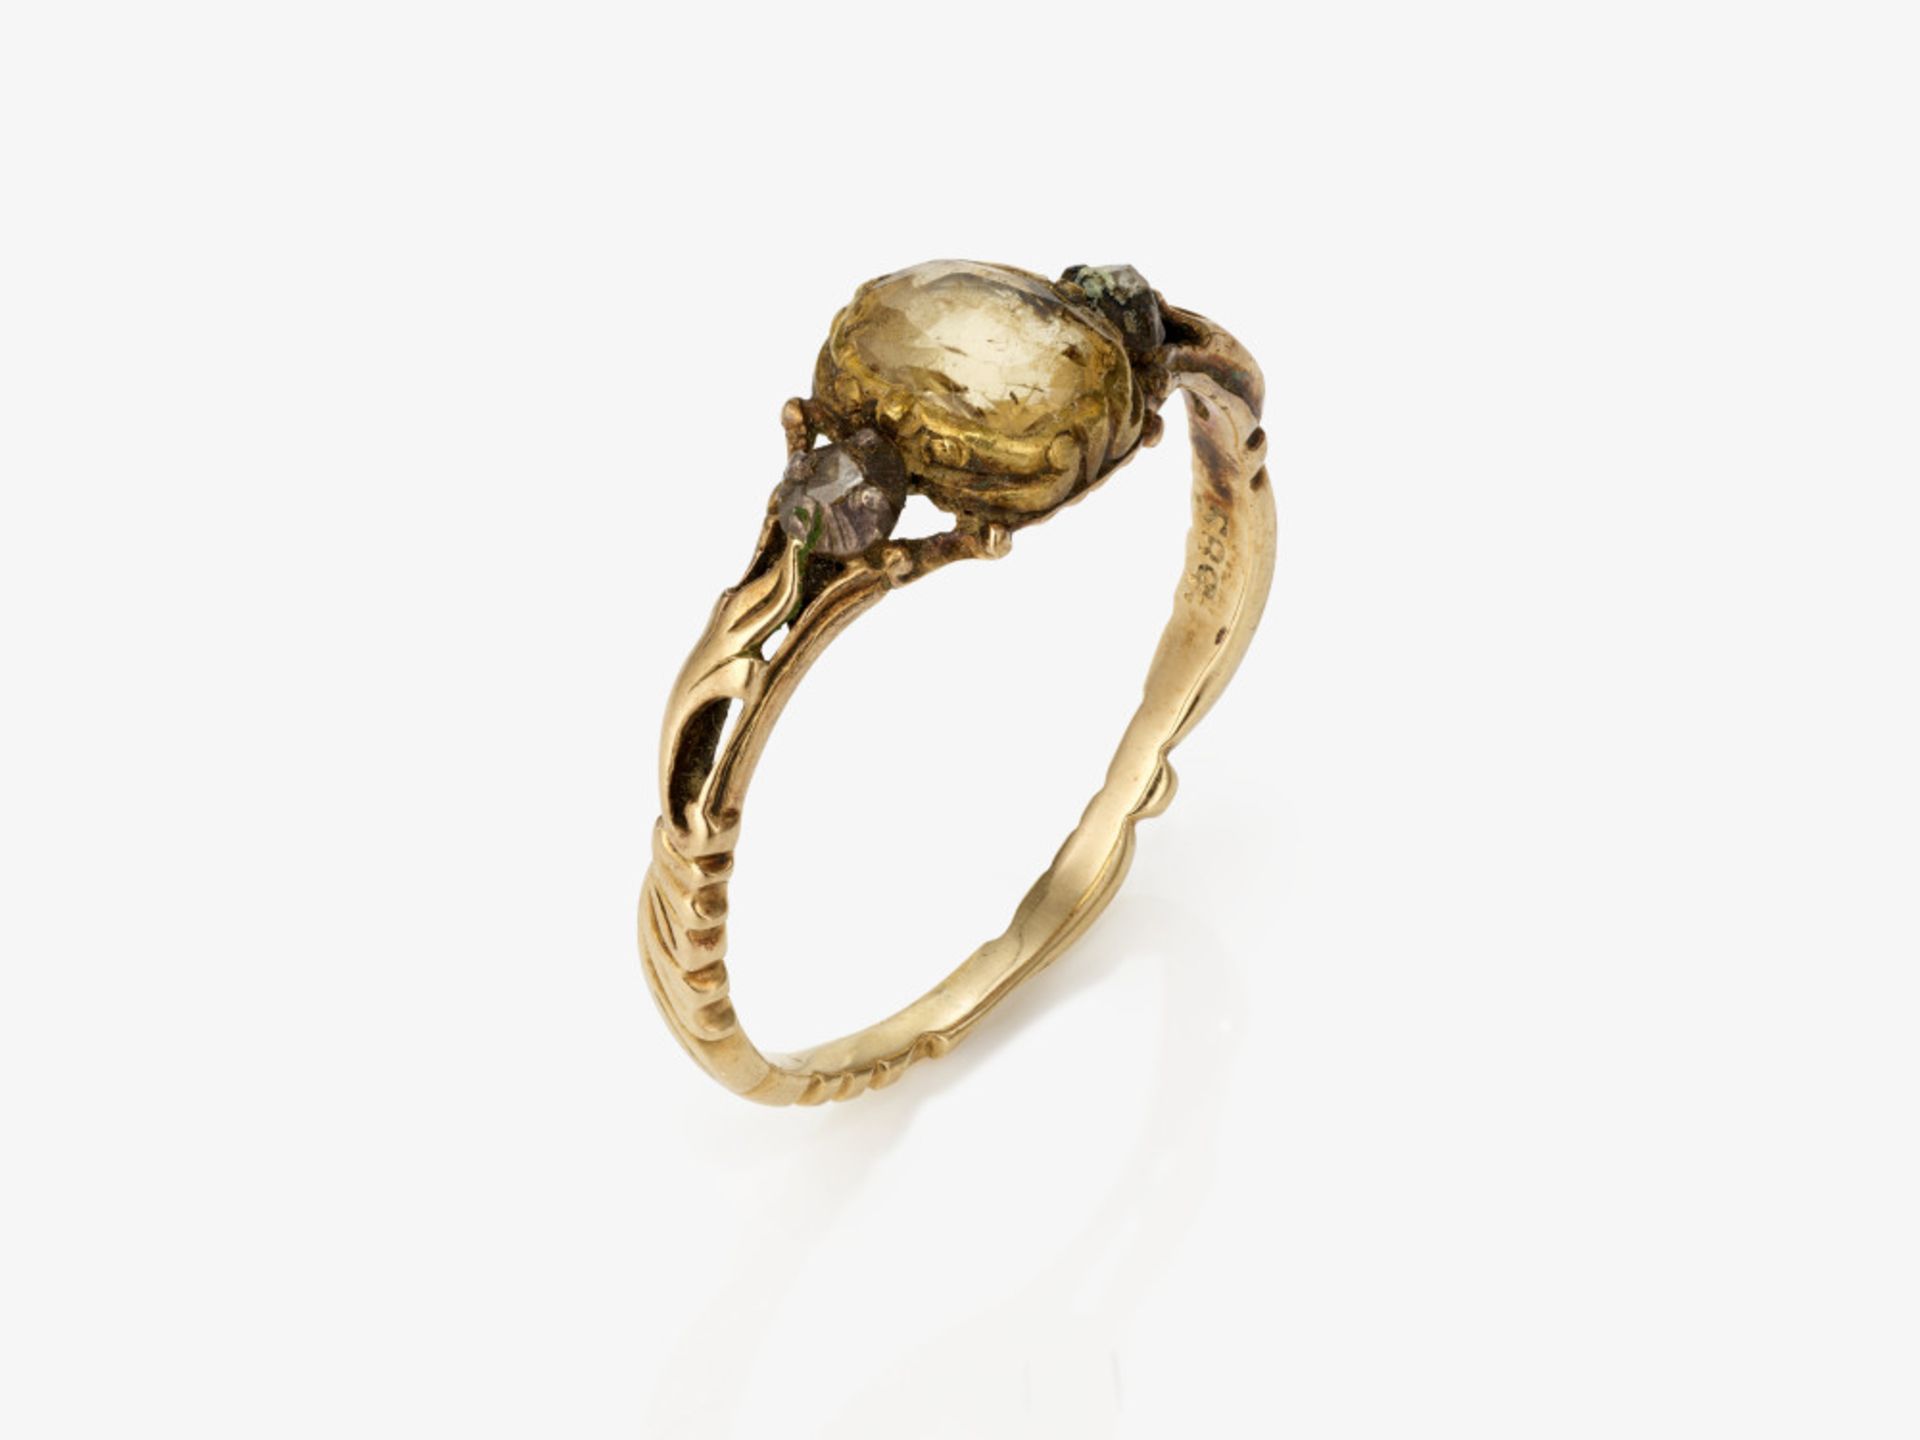 A ring with a yellow topaz and 2 diamonds - West Europe, 1750-1770